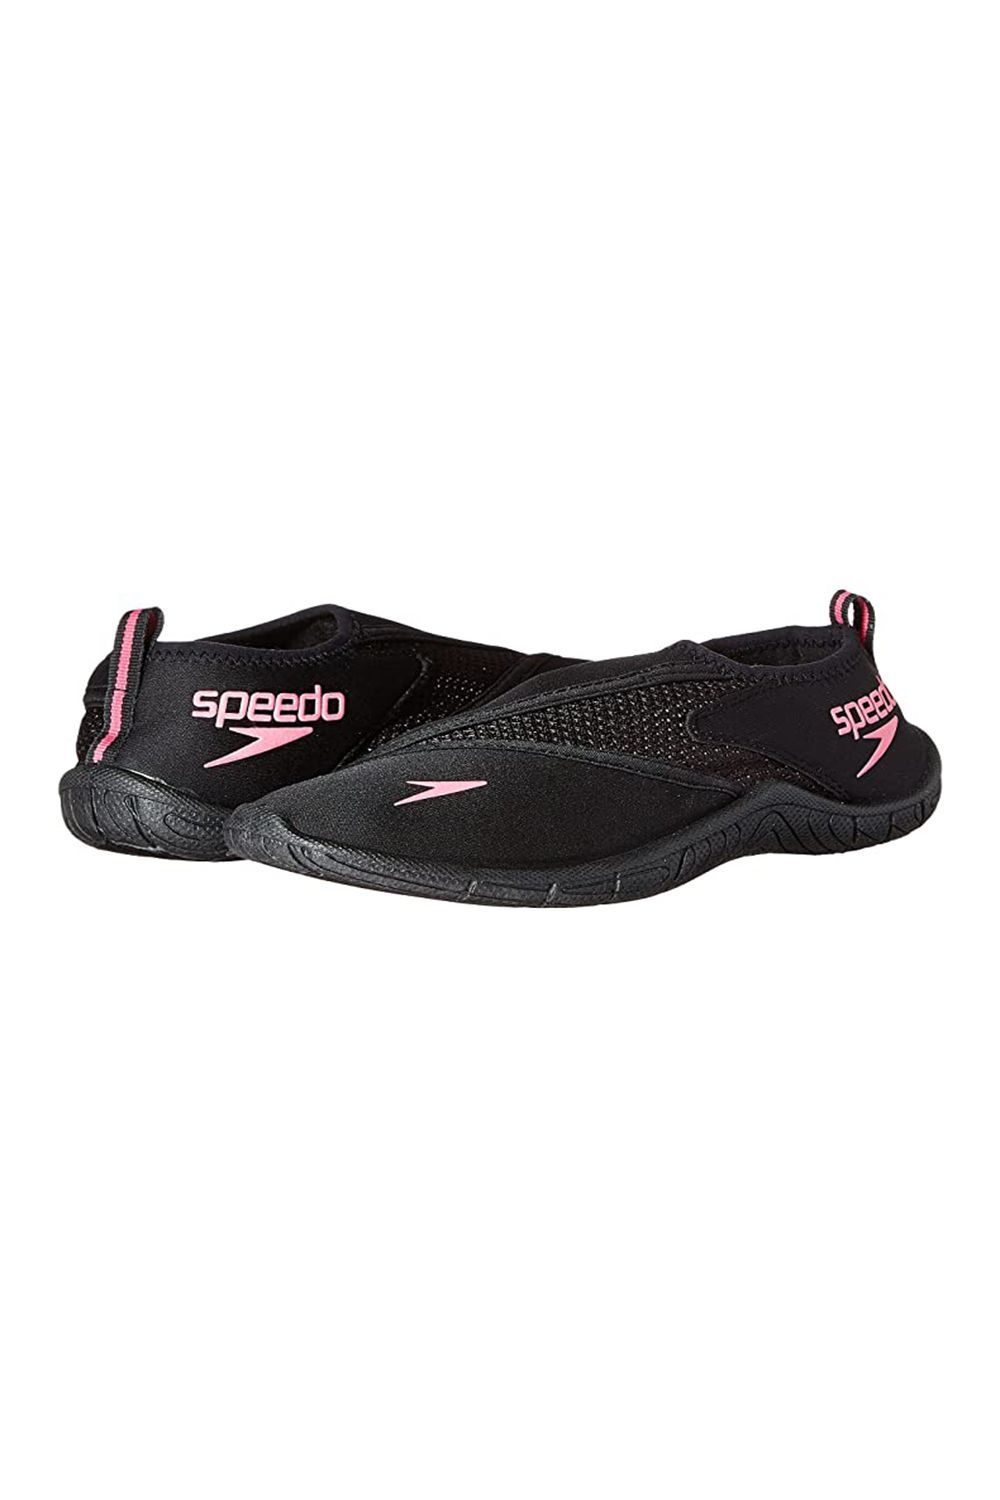 roxy water shoes